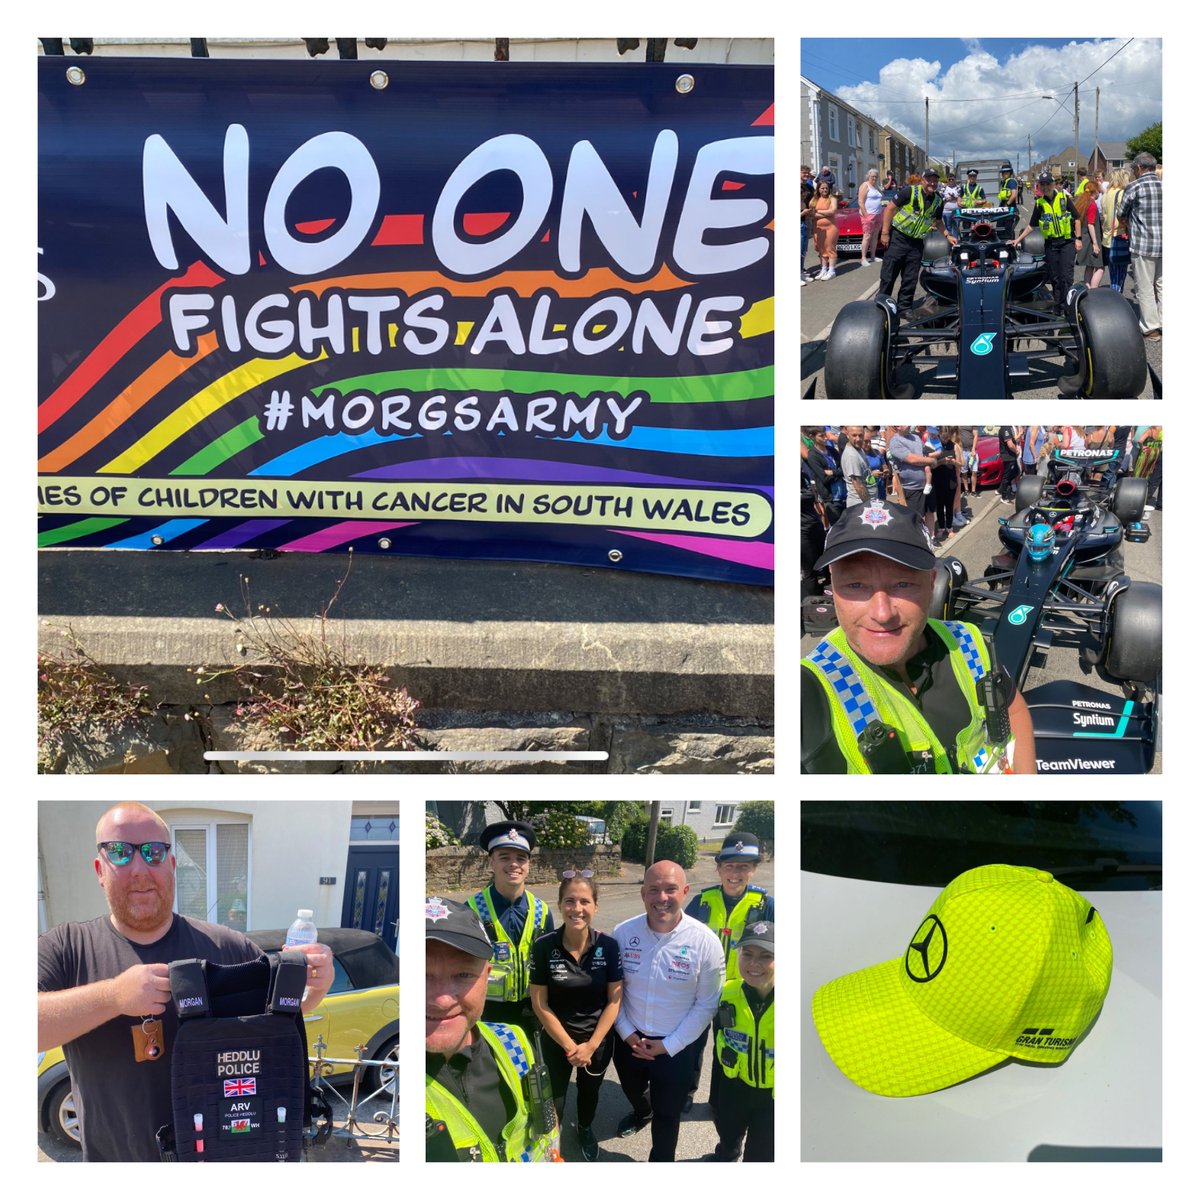 Another hugely rewarding day in Gorseinon supporting all the people that contributed to an amazing afternoon. To see a F1 car on Frampton Road was fantastic, huge thanks to @MercedesAMGF1 We are all #MORGSARMY @swpolice @SWPSwansea